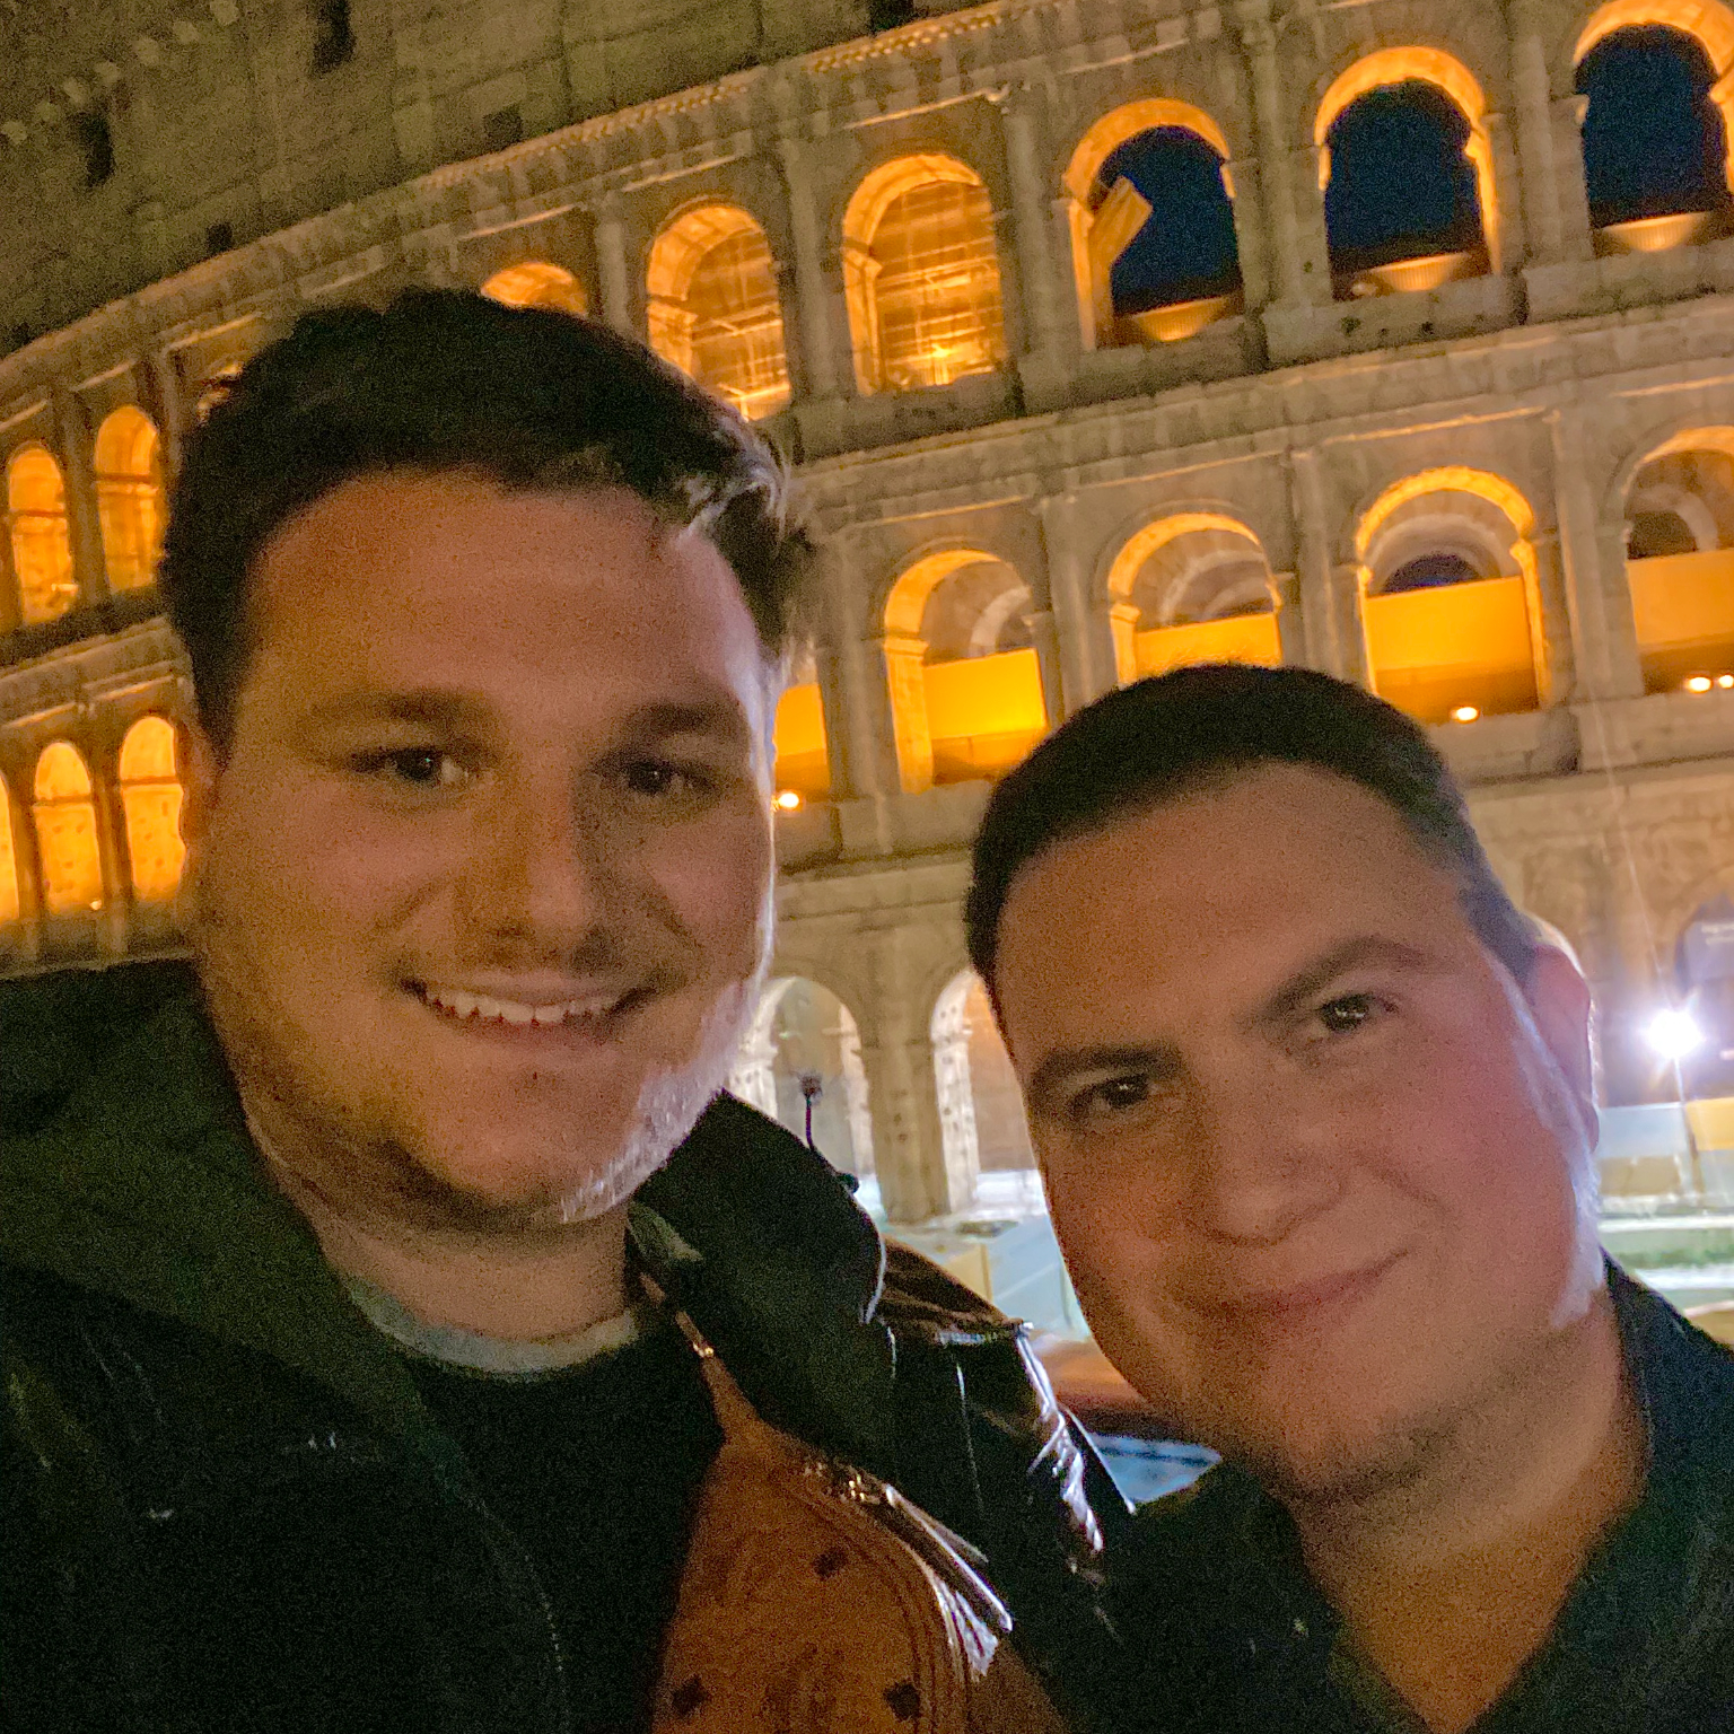 At the Colosseum